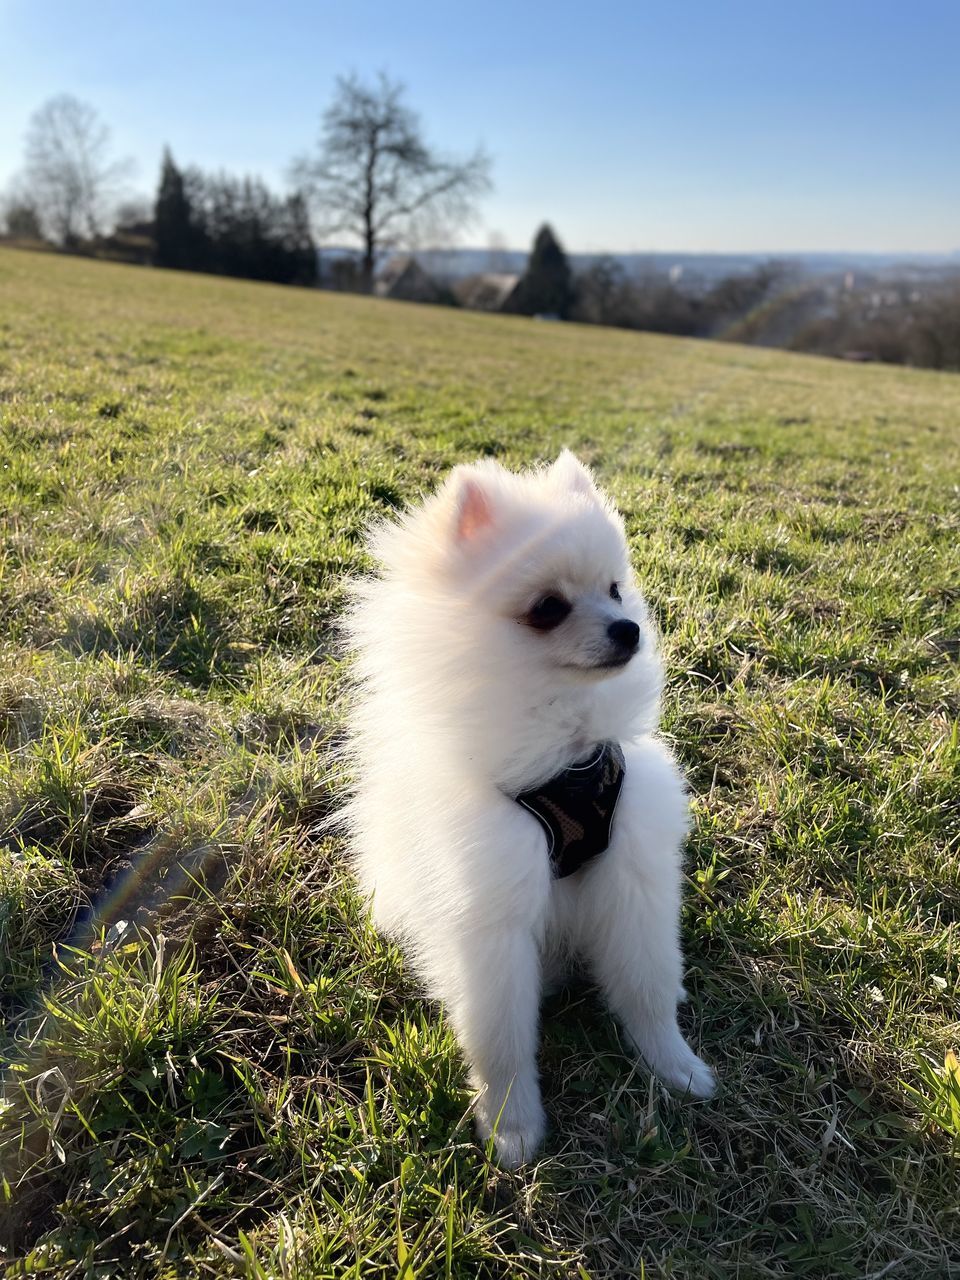 one animal, animal themes, animal, mammal, dog, domestic animals, pet, canine, grass, plant, samoyed, sky, nature, japanese spitz, no people, white, day, land, environment, landscape, sunlight, green, looking, outdoors, field, cute, clear sky